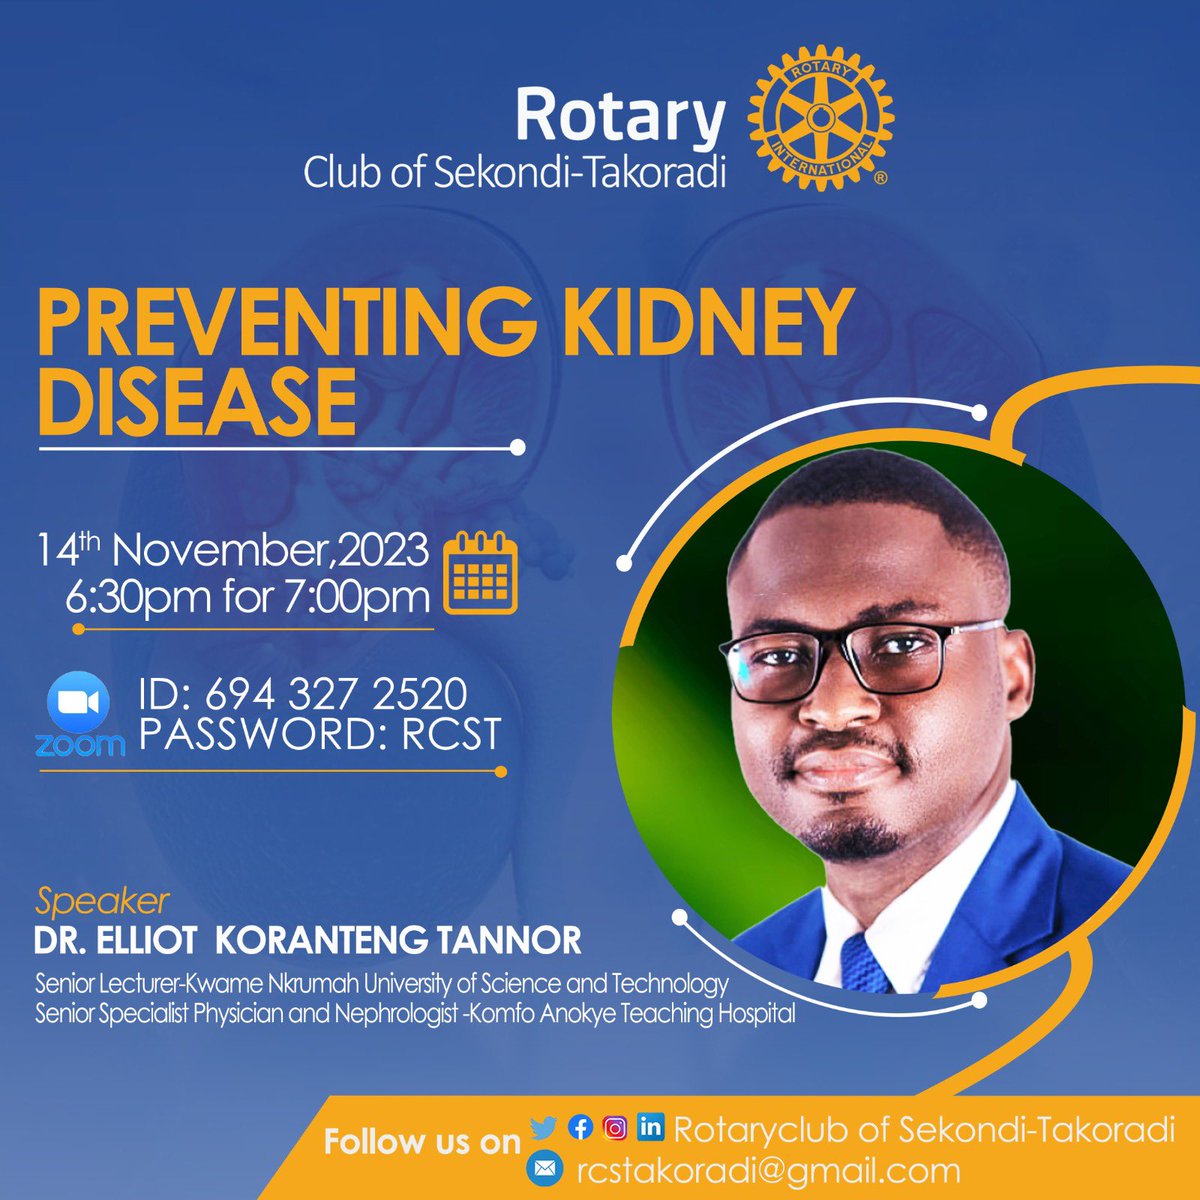 It’s all about #WorldDiabetesDay . I will be spending sometime with the rotarians of Secondi-Takoradi to discuss one of the major complications of diabetes - diabetic kidney disease. 

#kidneyhealthinternational
#WorldDiabetesDay
#kidneyhealthforall
#HealthyKidneys